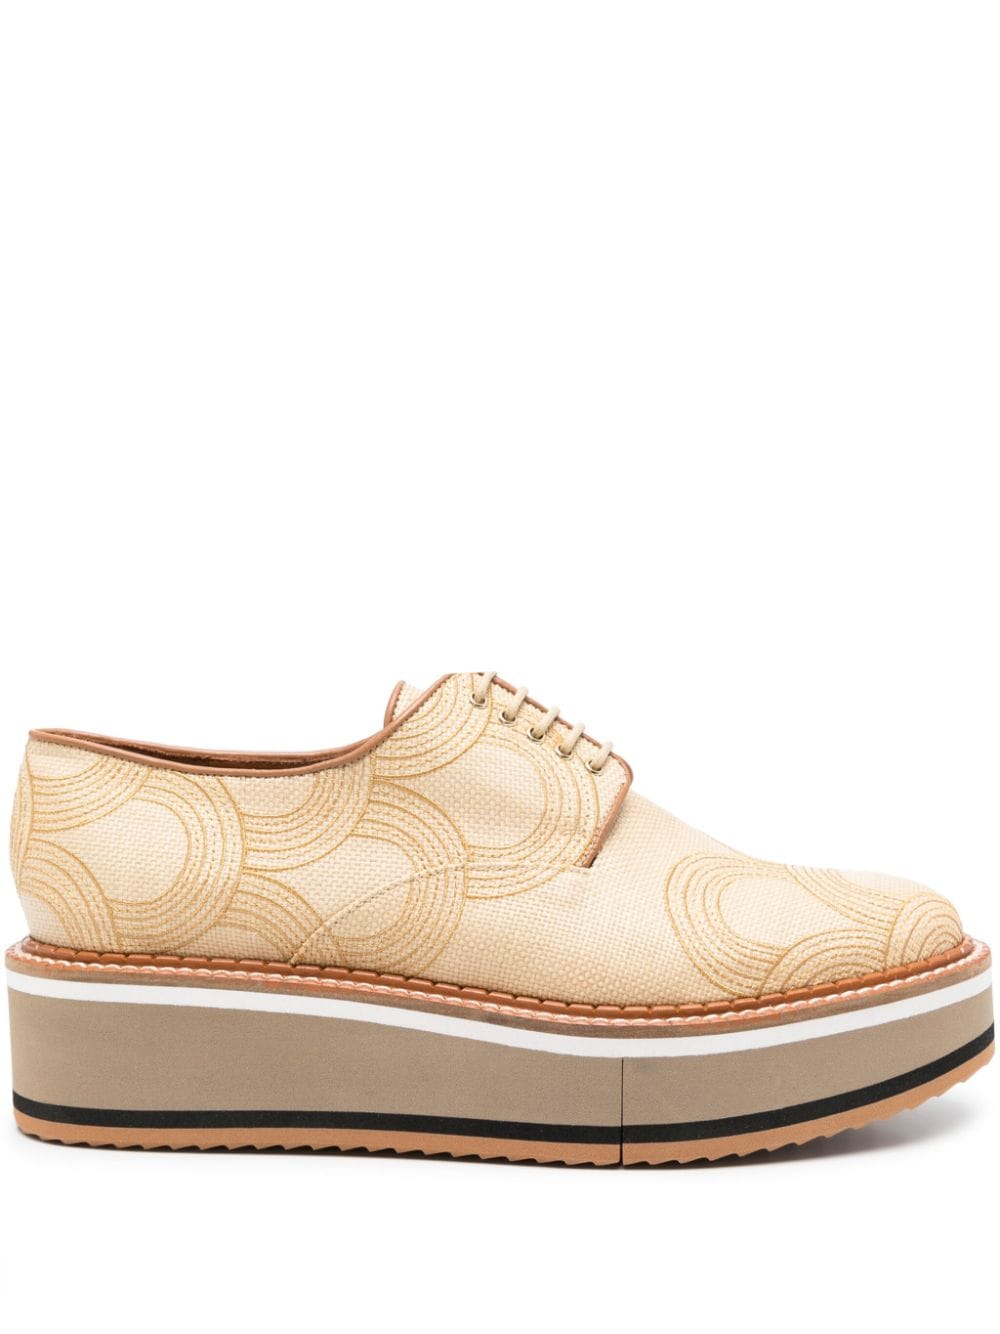 Clergerie Baxter 45mm Oxford Shoes In Multi